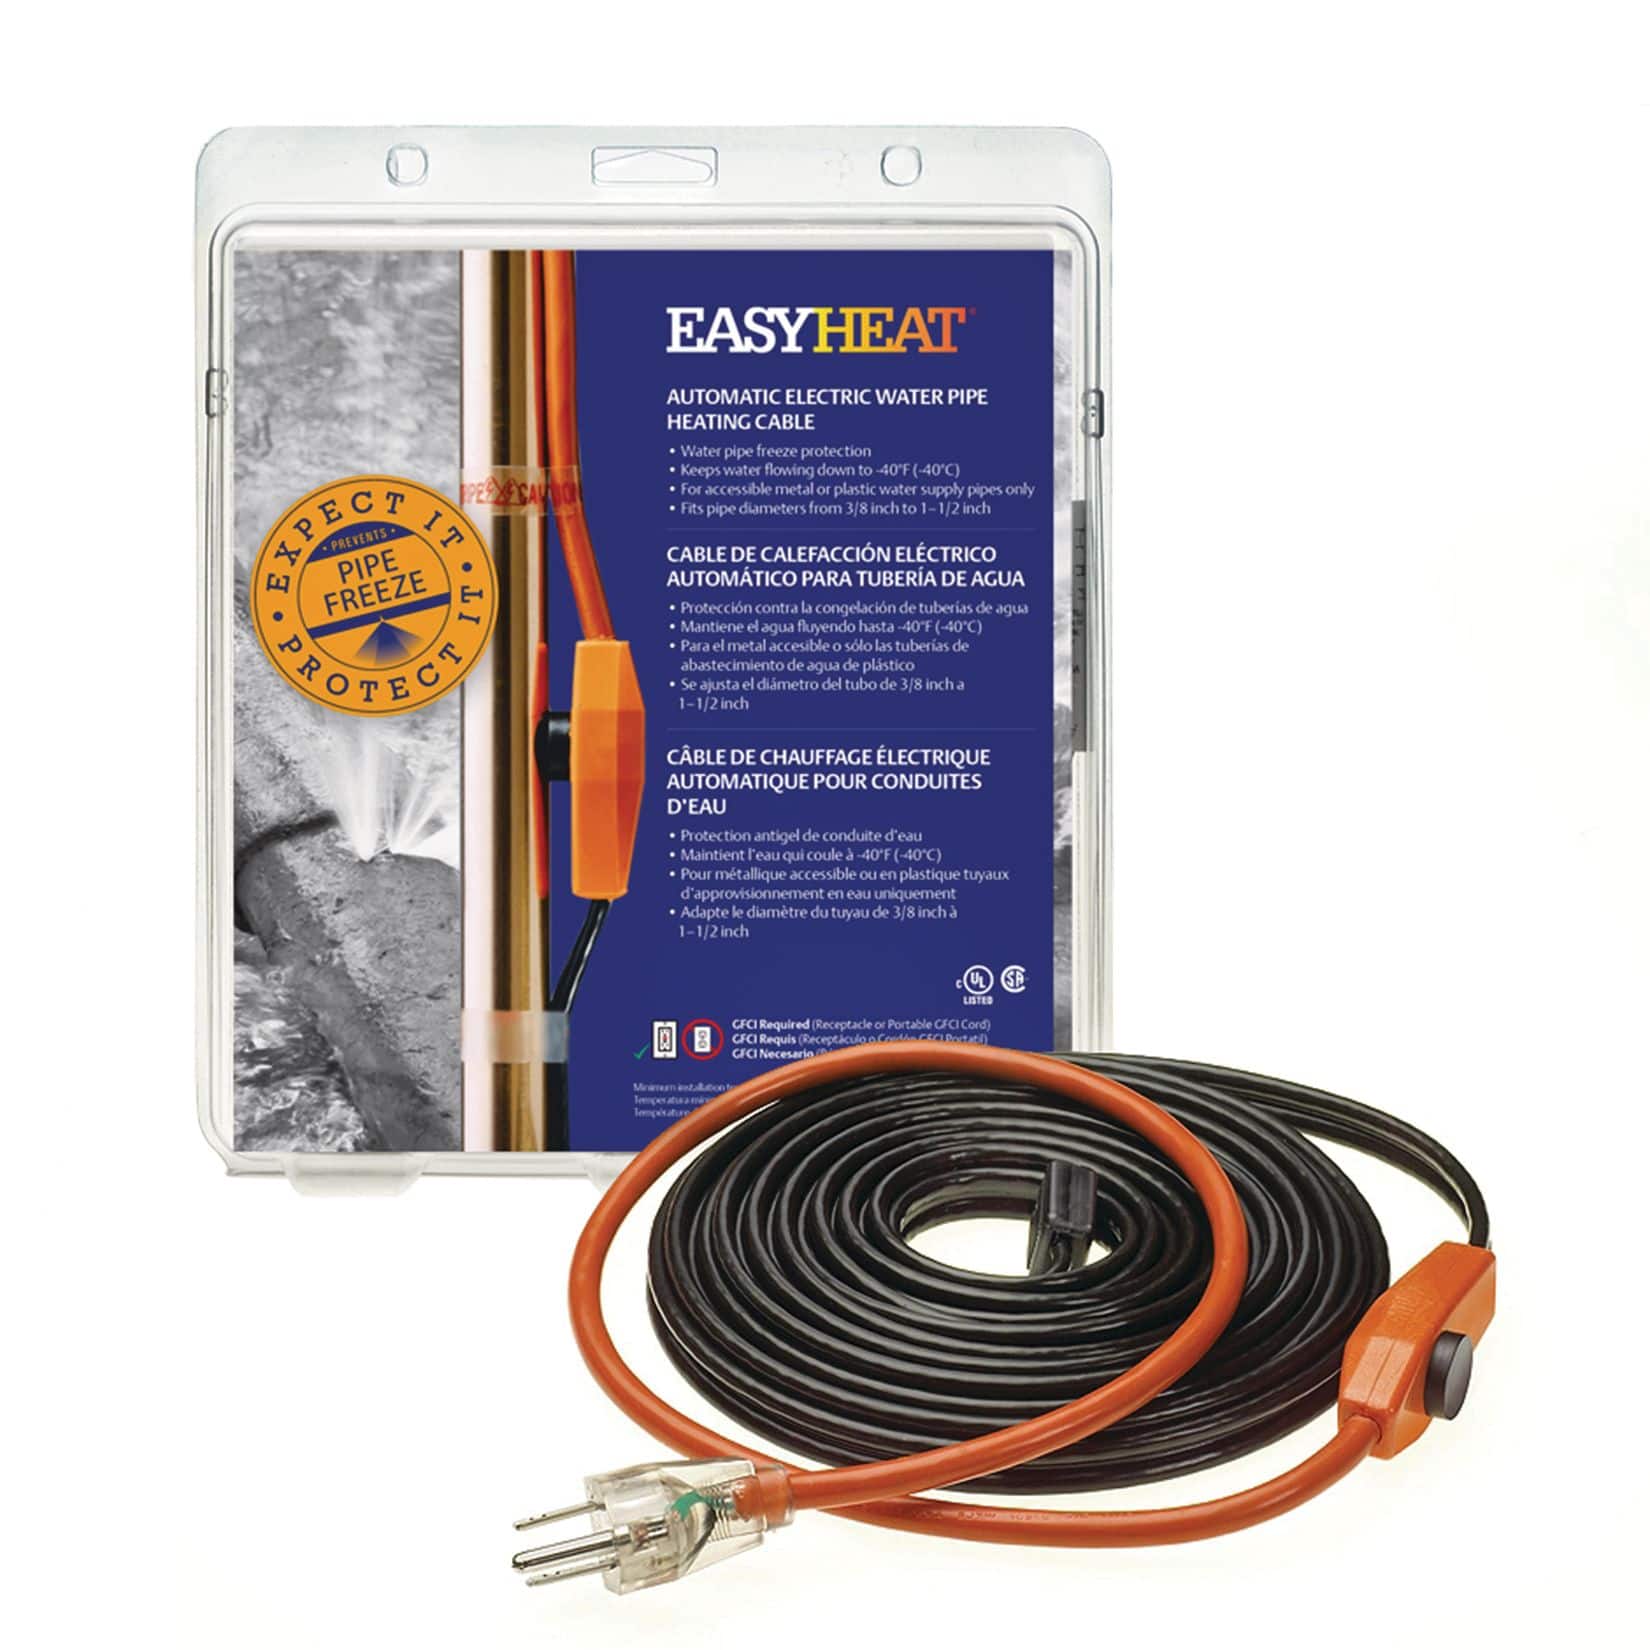 EASYHEAT Automatic Electric Water Pipe Heating Cables, Protects